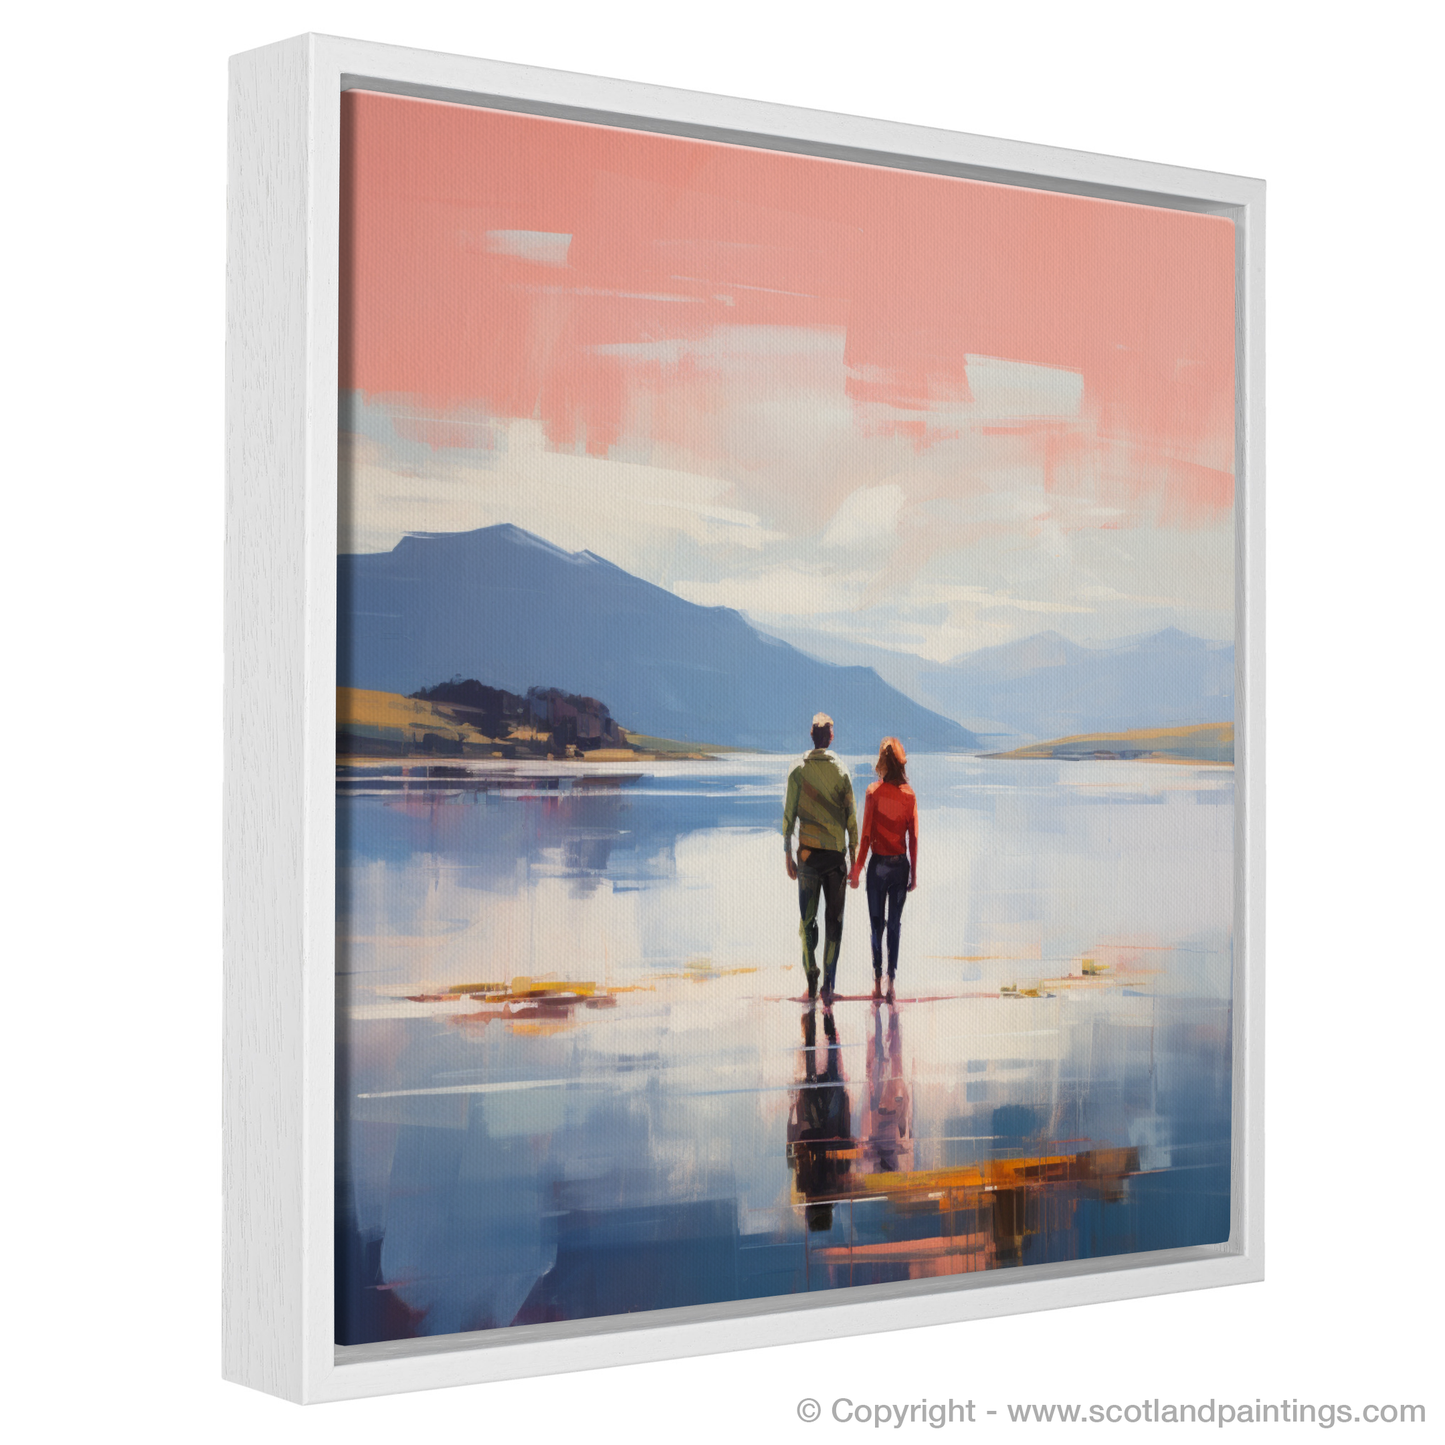 Painting and Art Print of A couple holding hands looking out on Loch Lomond entitled "Embrace at Dusk: A Loch Lomond Reverie".